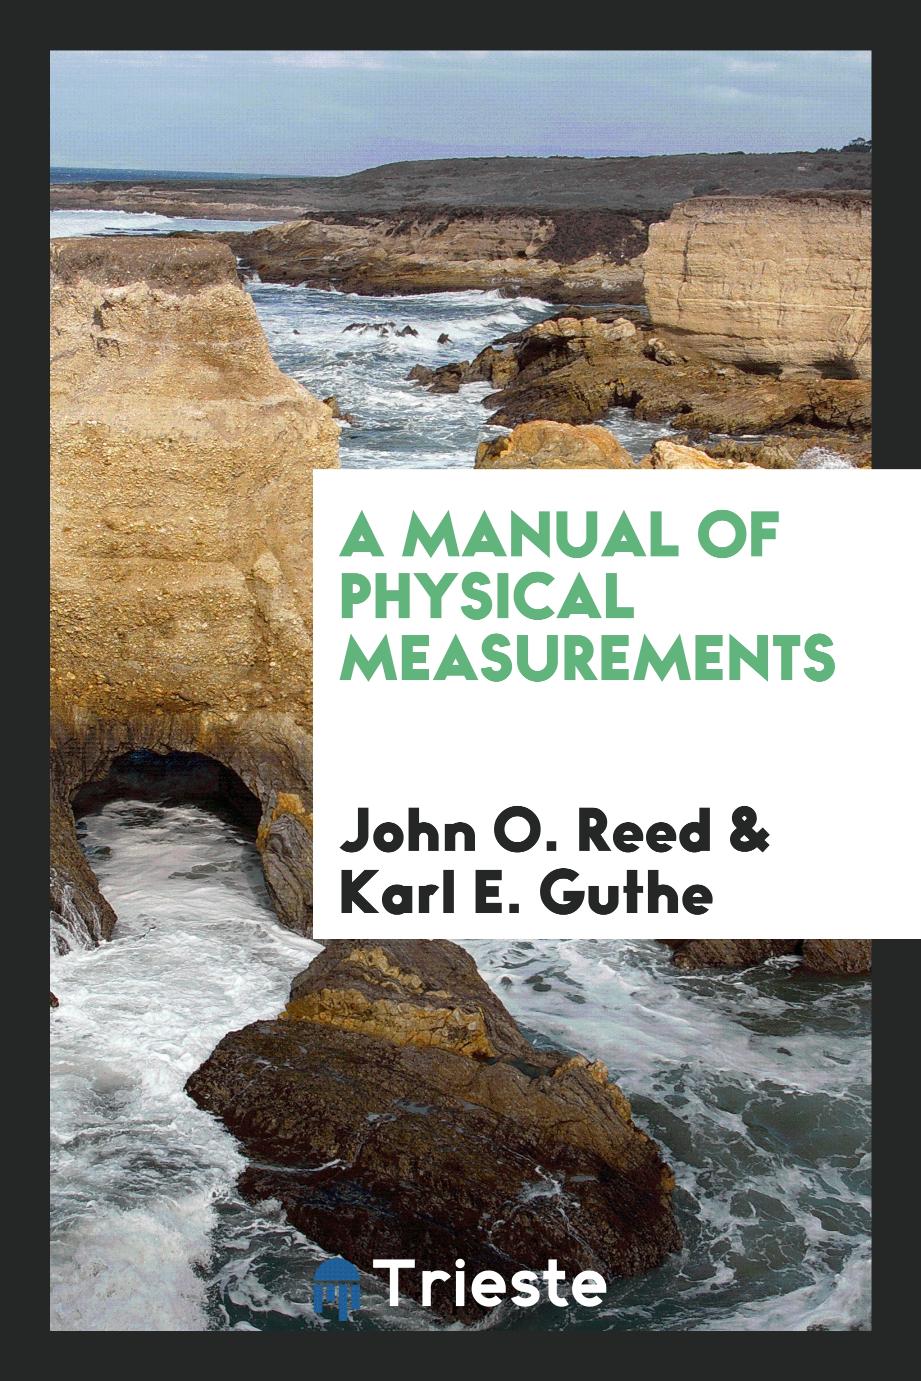 A manual of physical measurements